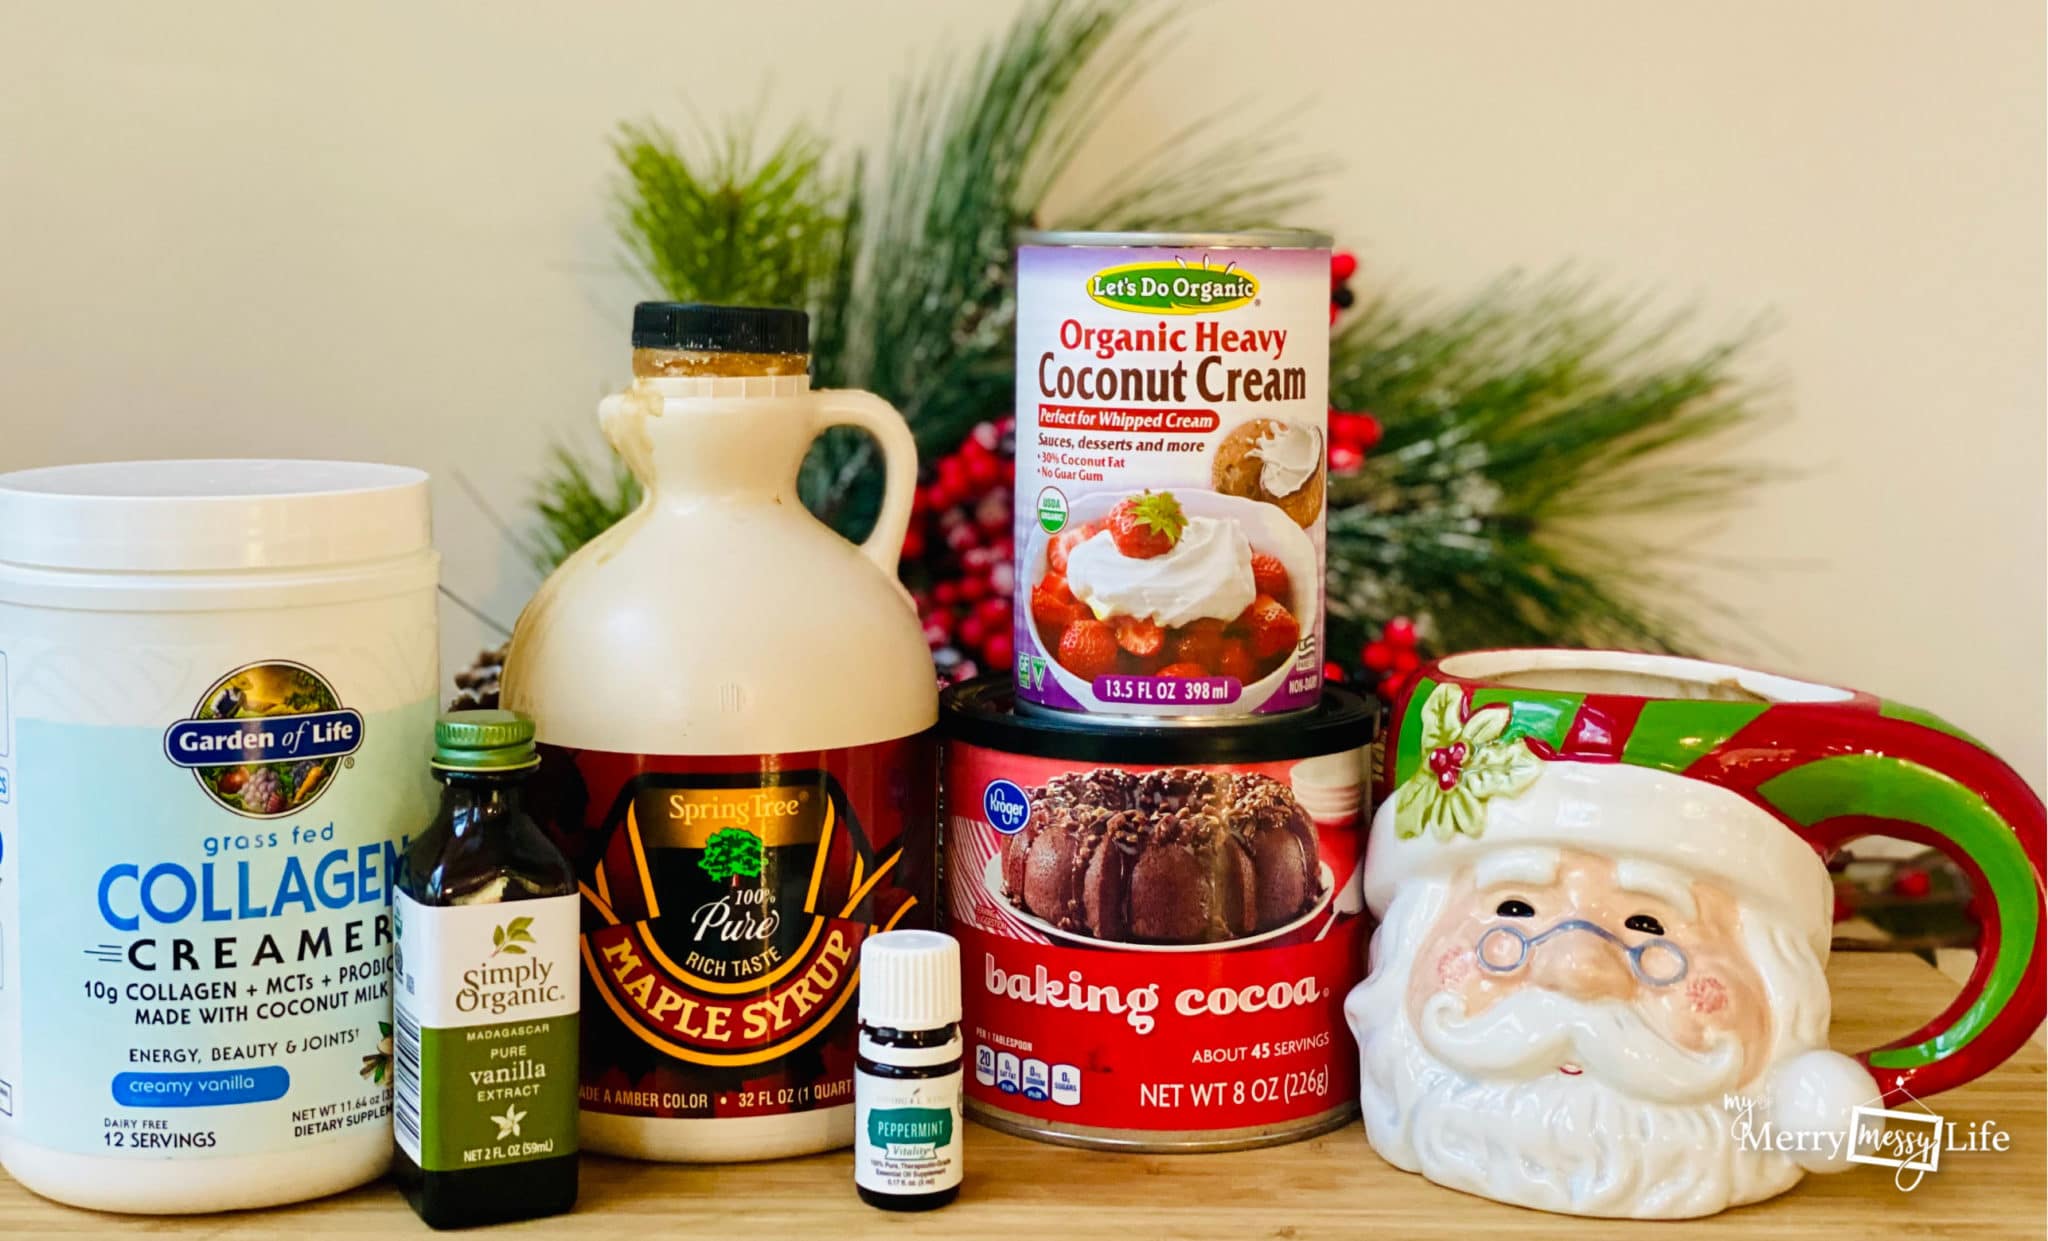 Healthy Peppermint Mocha Creamer Recipe Ingredients - Collagen, Vanilla Extract, Maple Syrup, Milk, Cocoa, Peppermint extract or essential oil